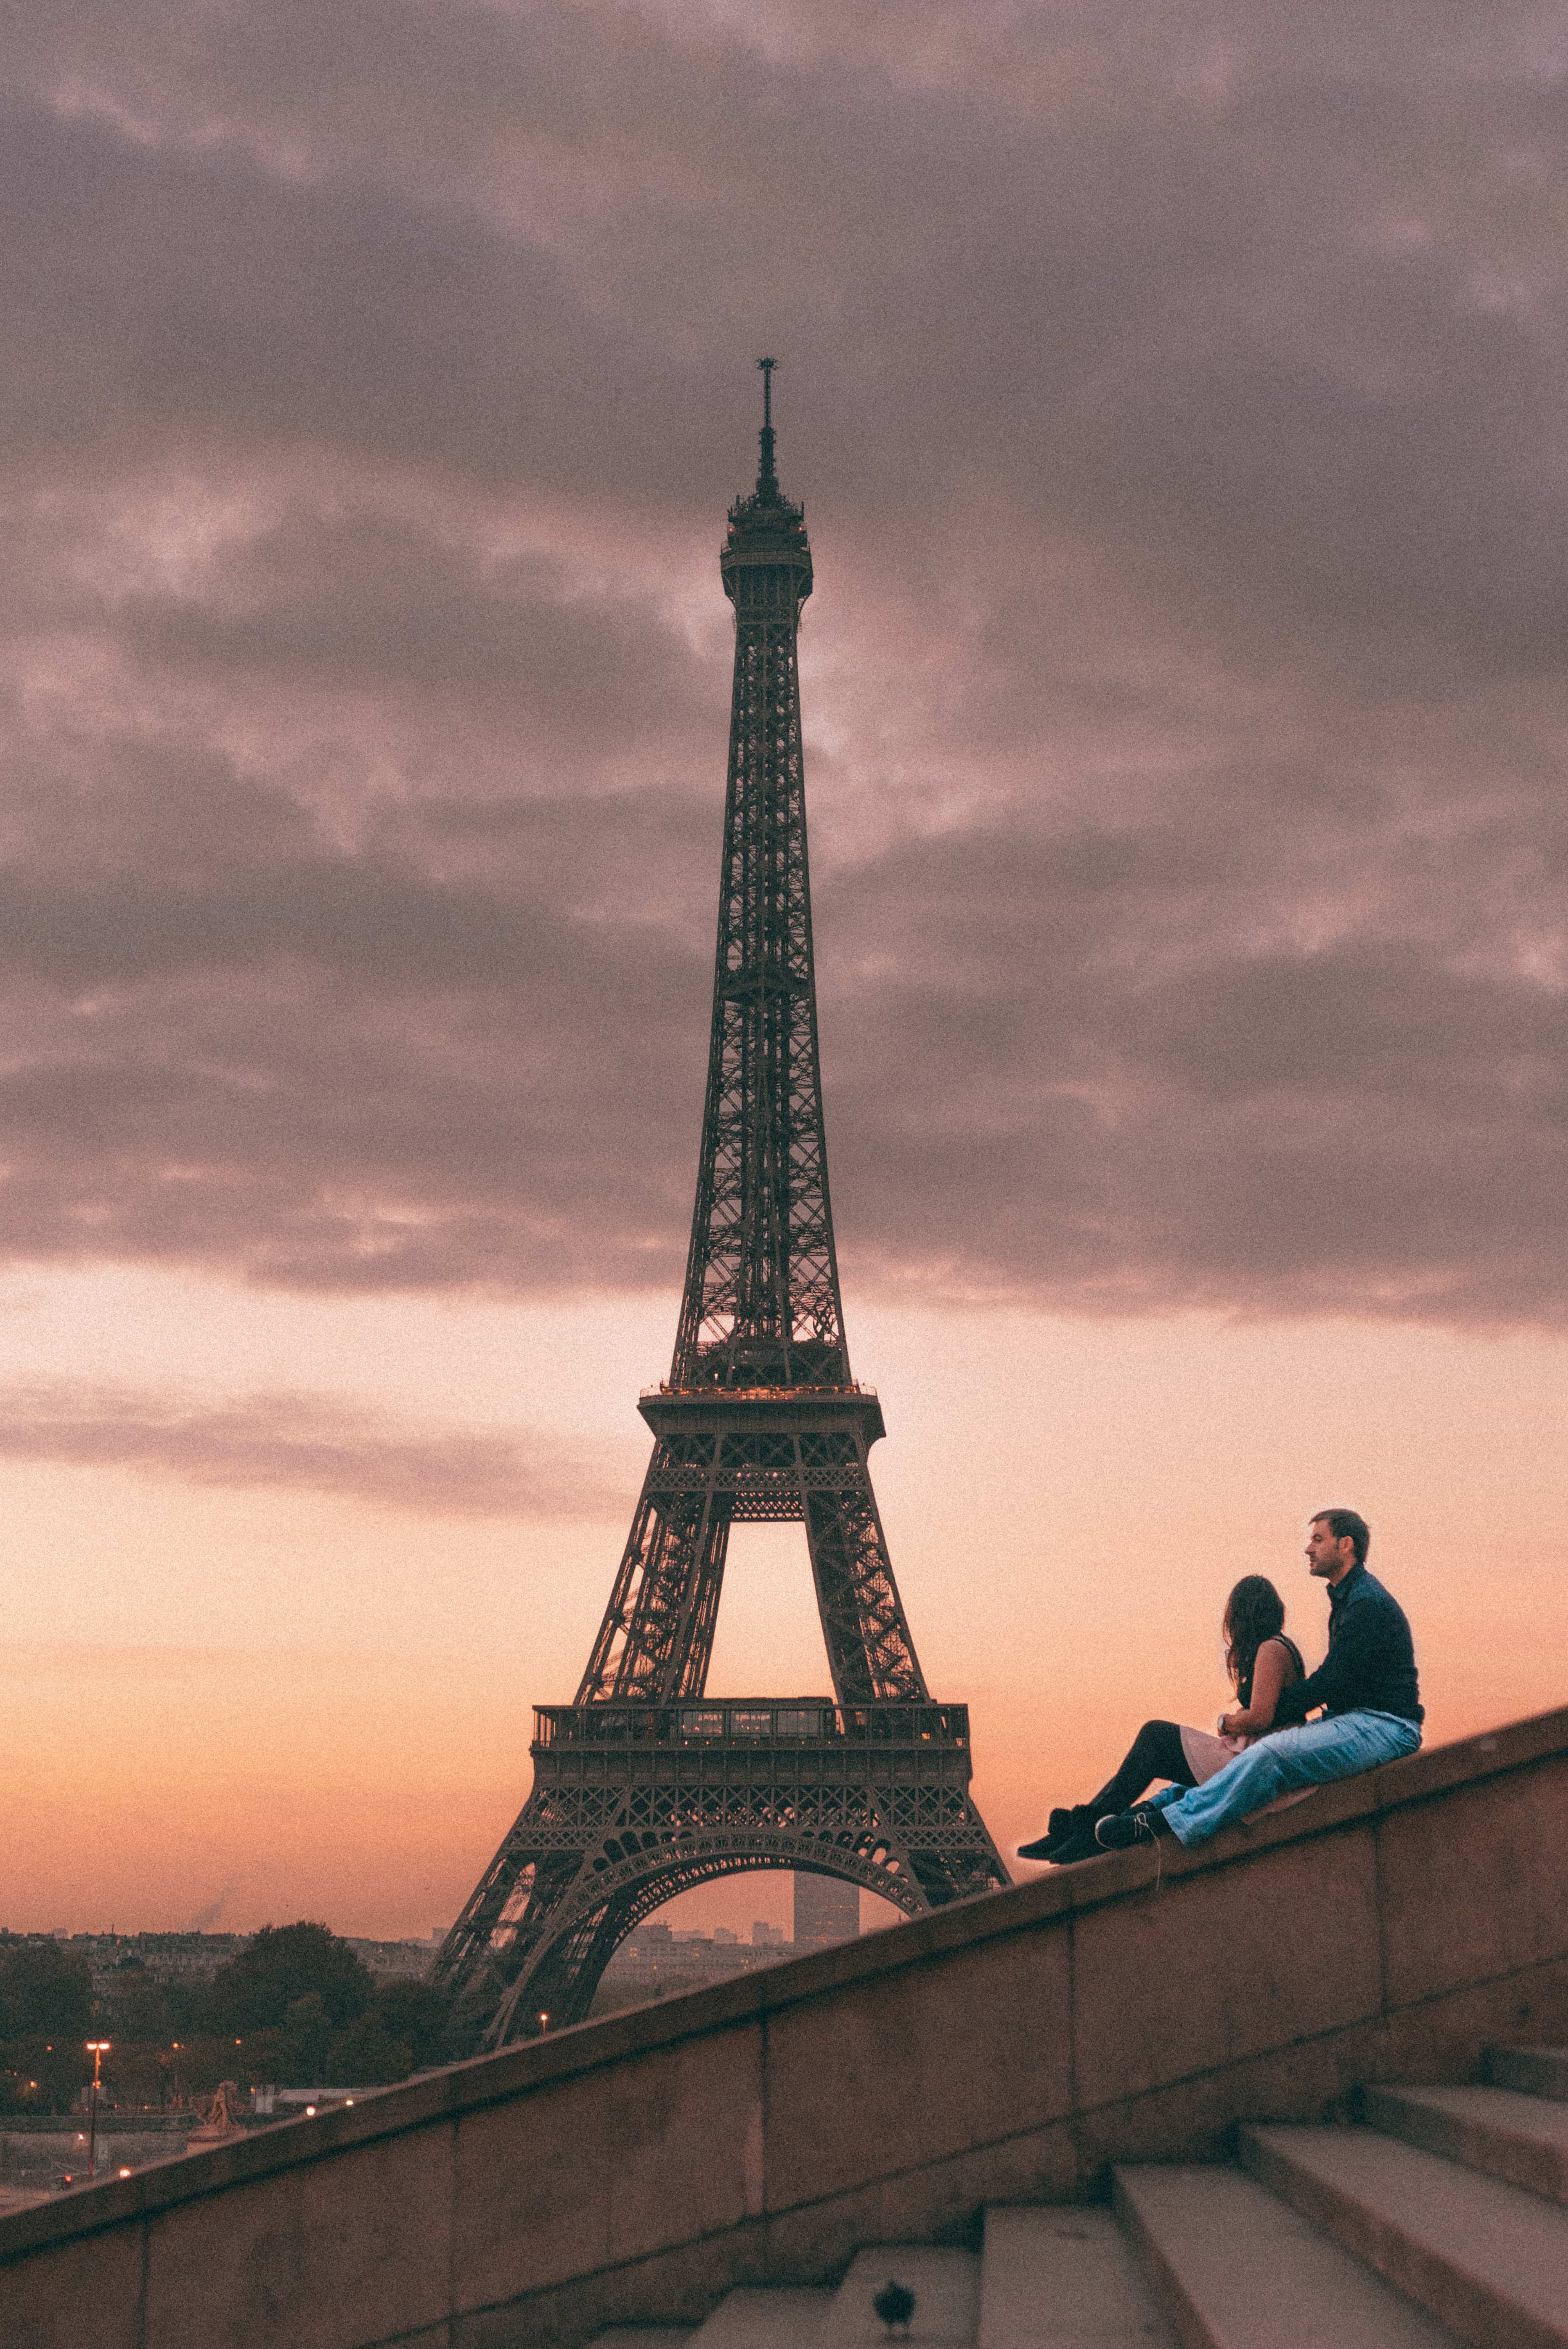 Most Instagrammable places in Paris, Eiffel Tower